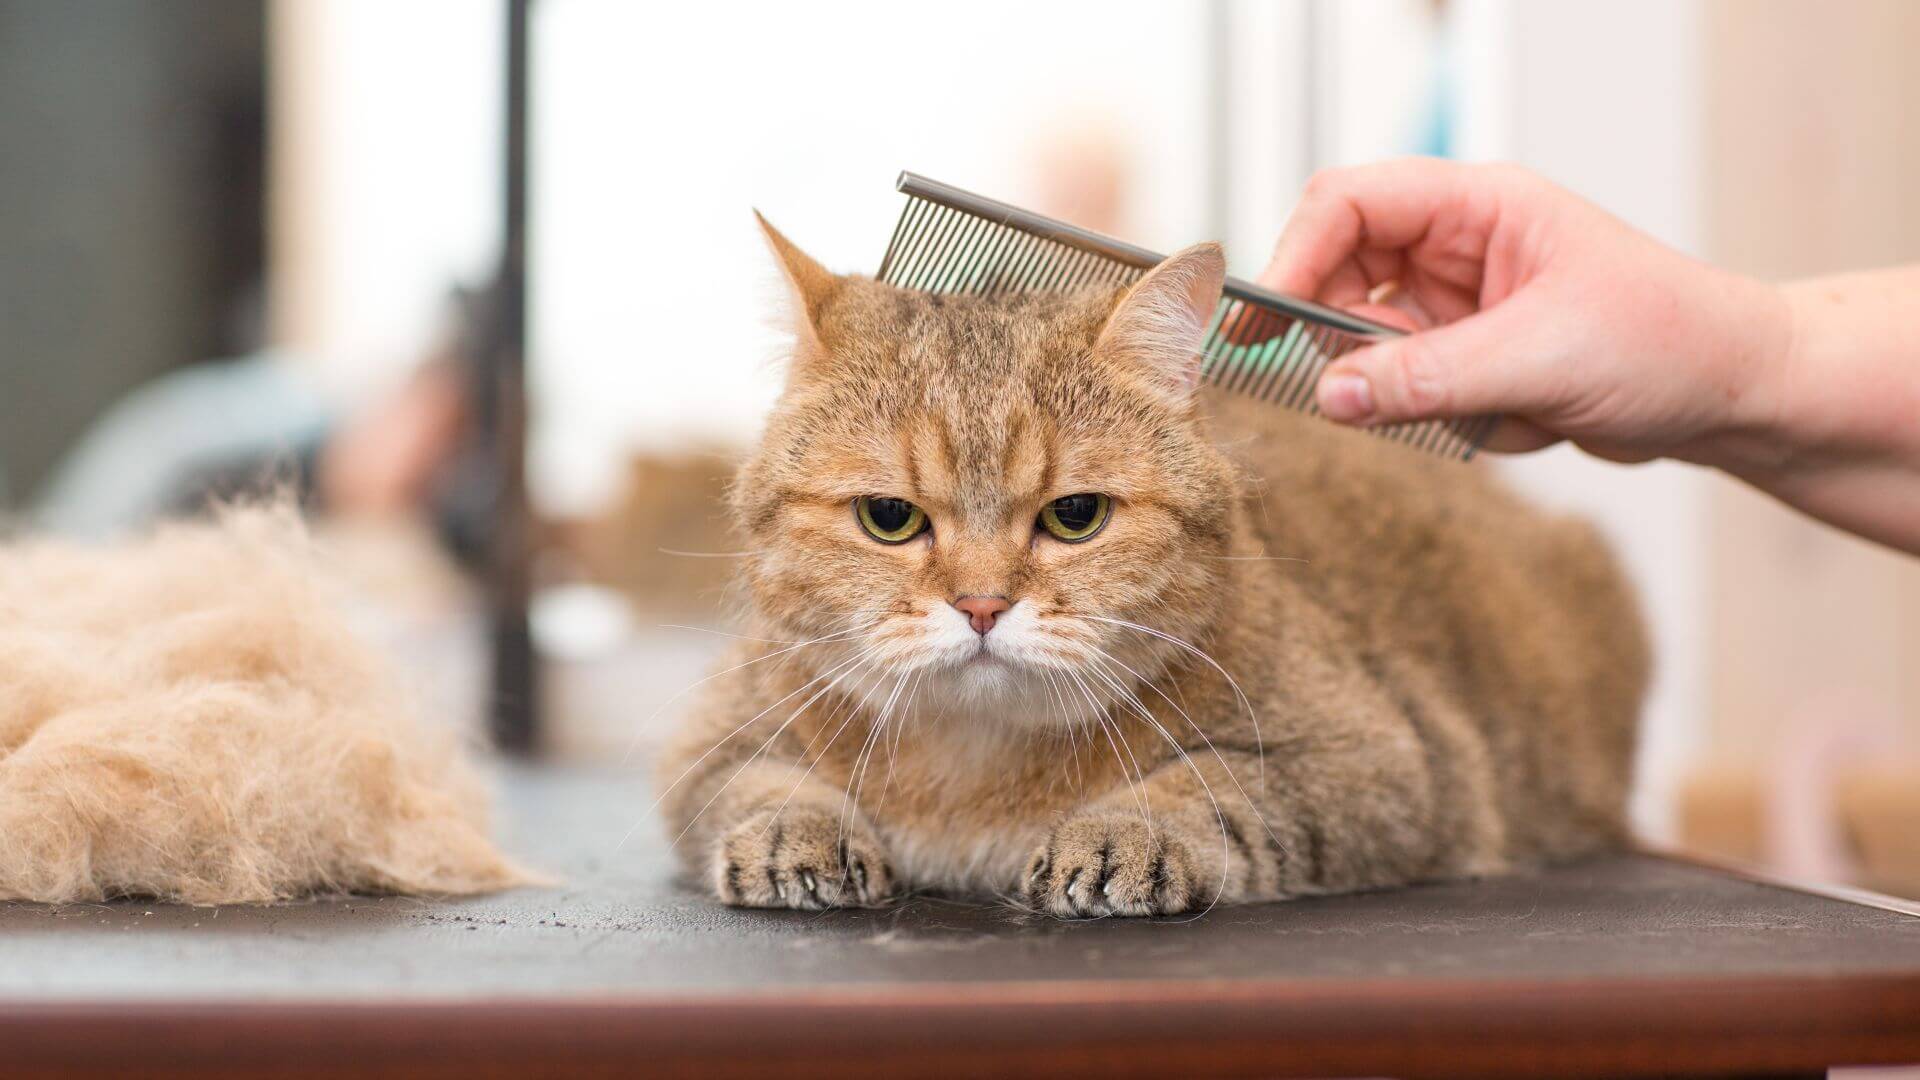 A person grooming a fluffy cat with a brush